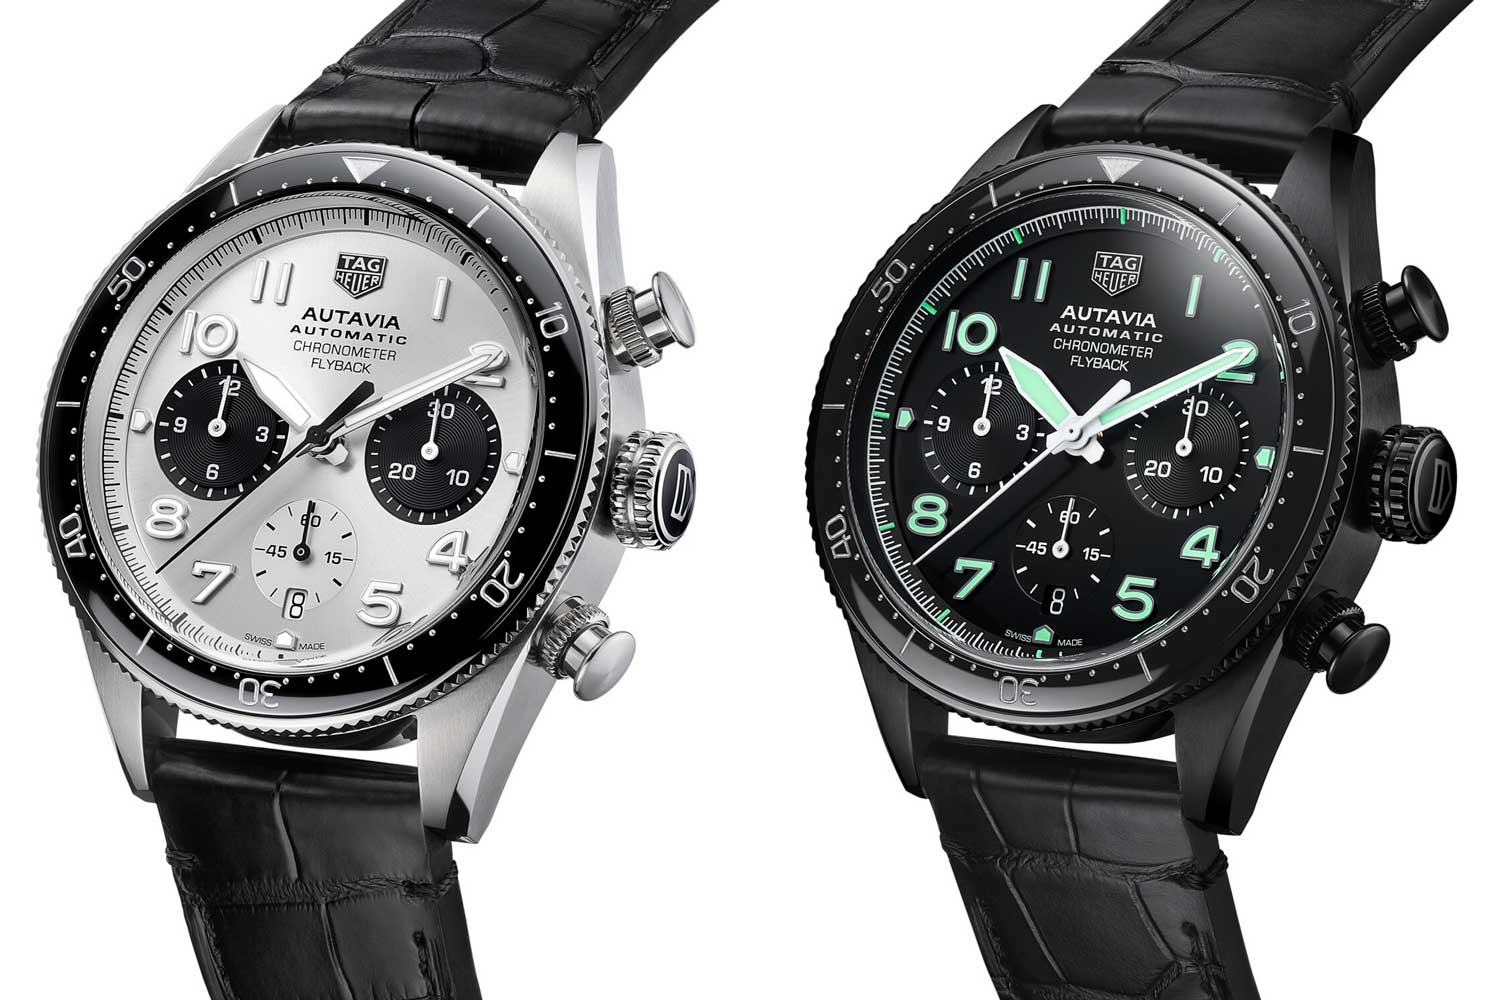 Autavia 60th Anniversary Flyback Chronograph is available in two versions, with panda-dial, or black DLC case